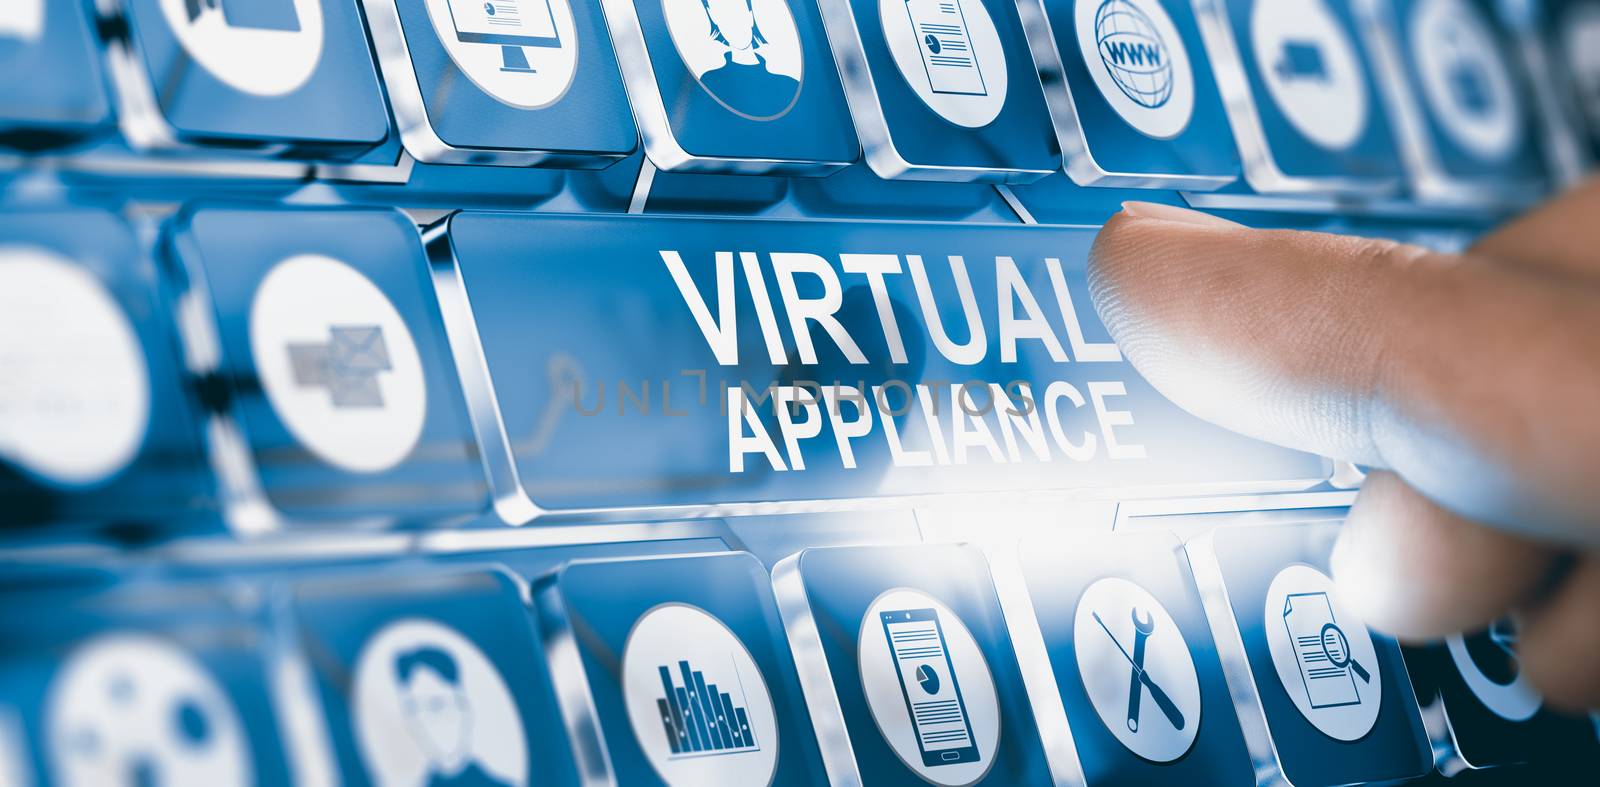 Virtual Appliance, Software Distribution by Olivier-Le-Moal